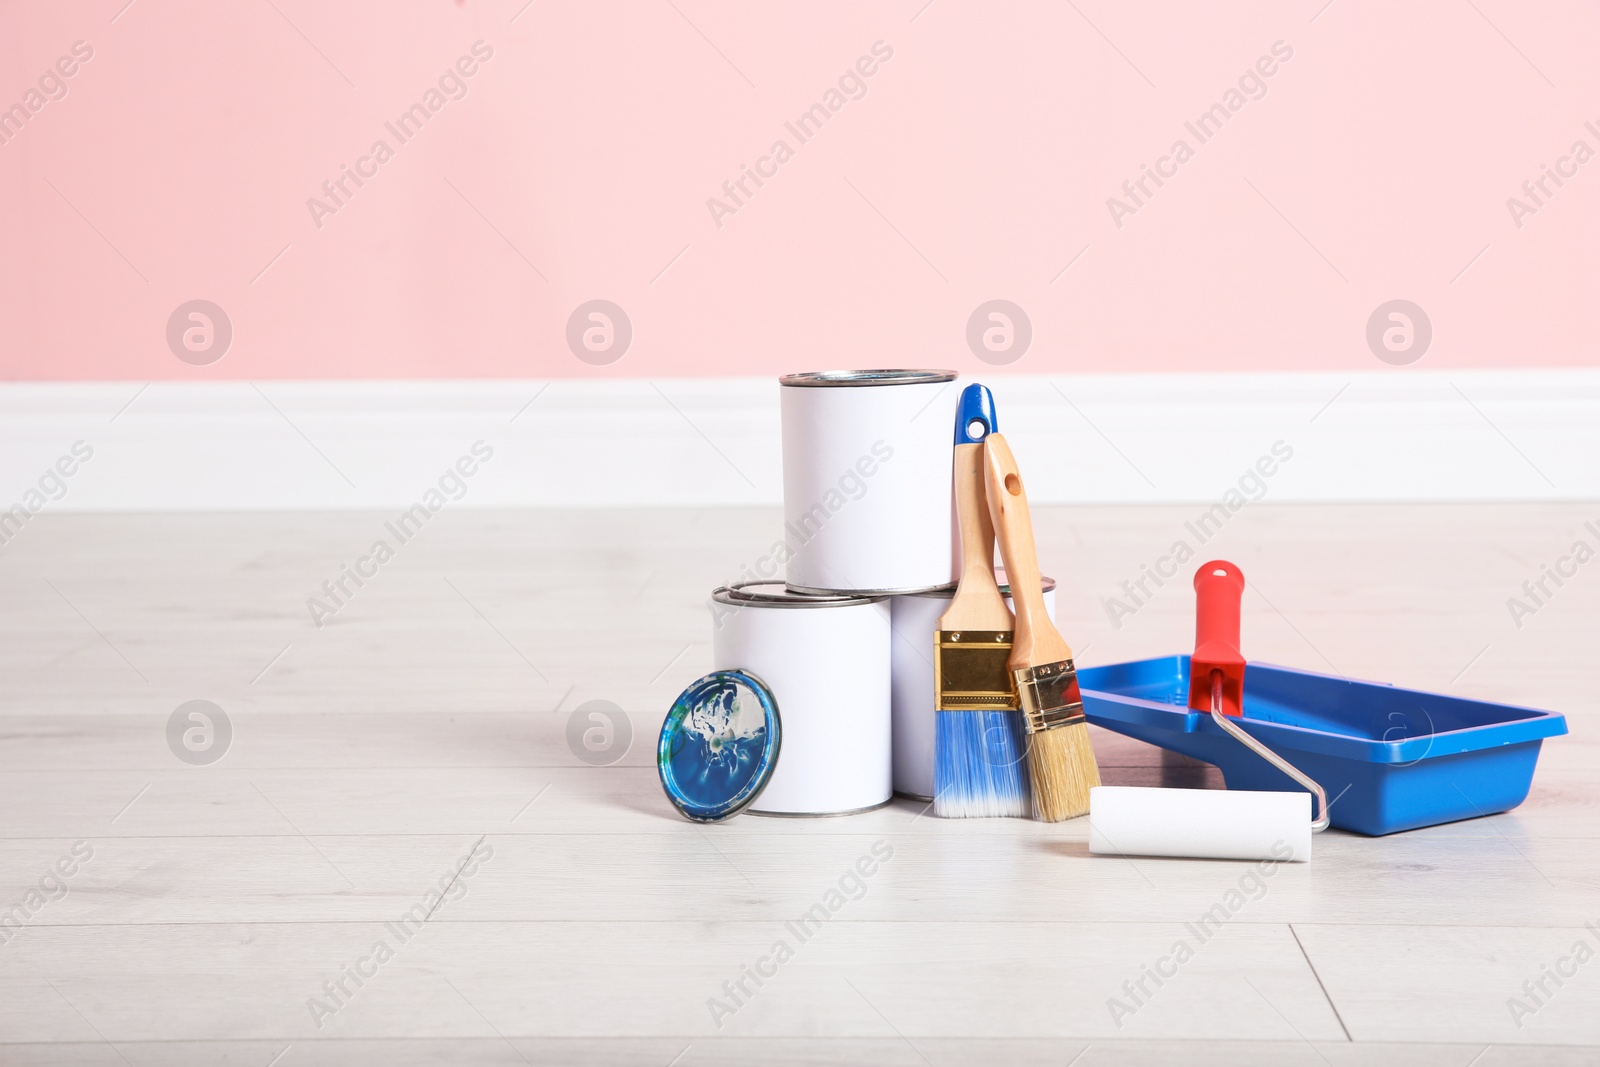 Photo of Cans of paint and decorator tools on wooden floor indoors. Space for text